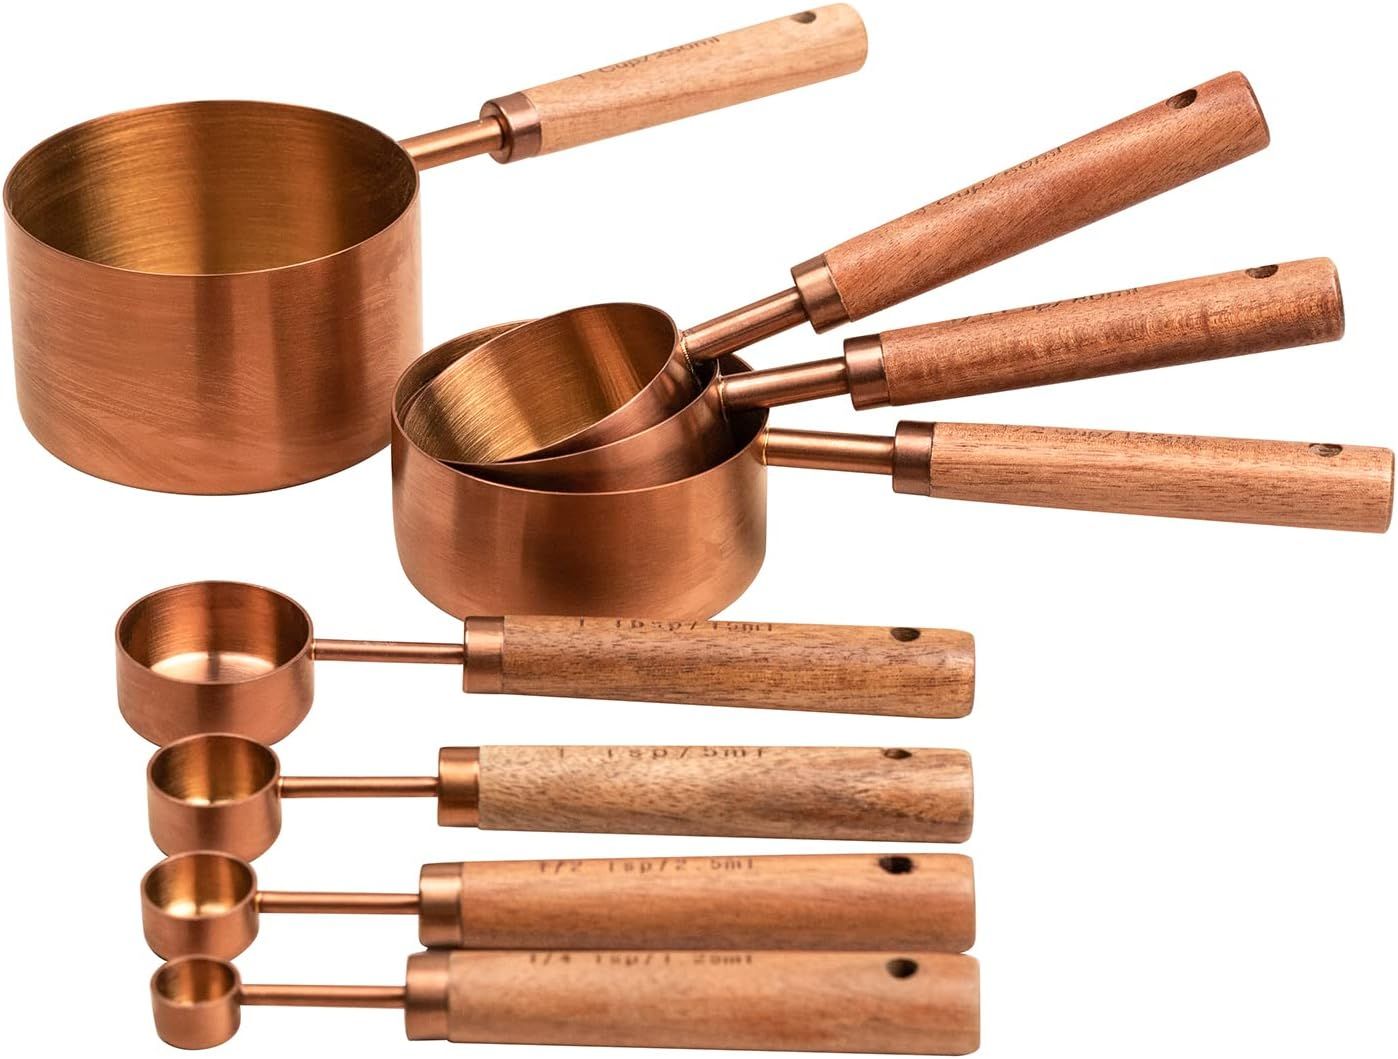 Copper Measuring Cups and Spoons with wooden handles 8pc Set | Amazon (US)